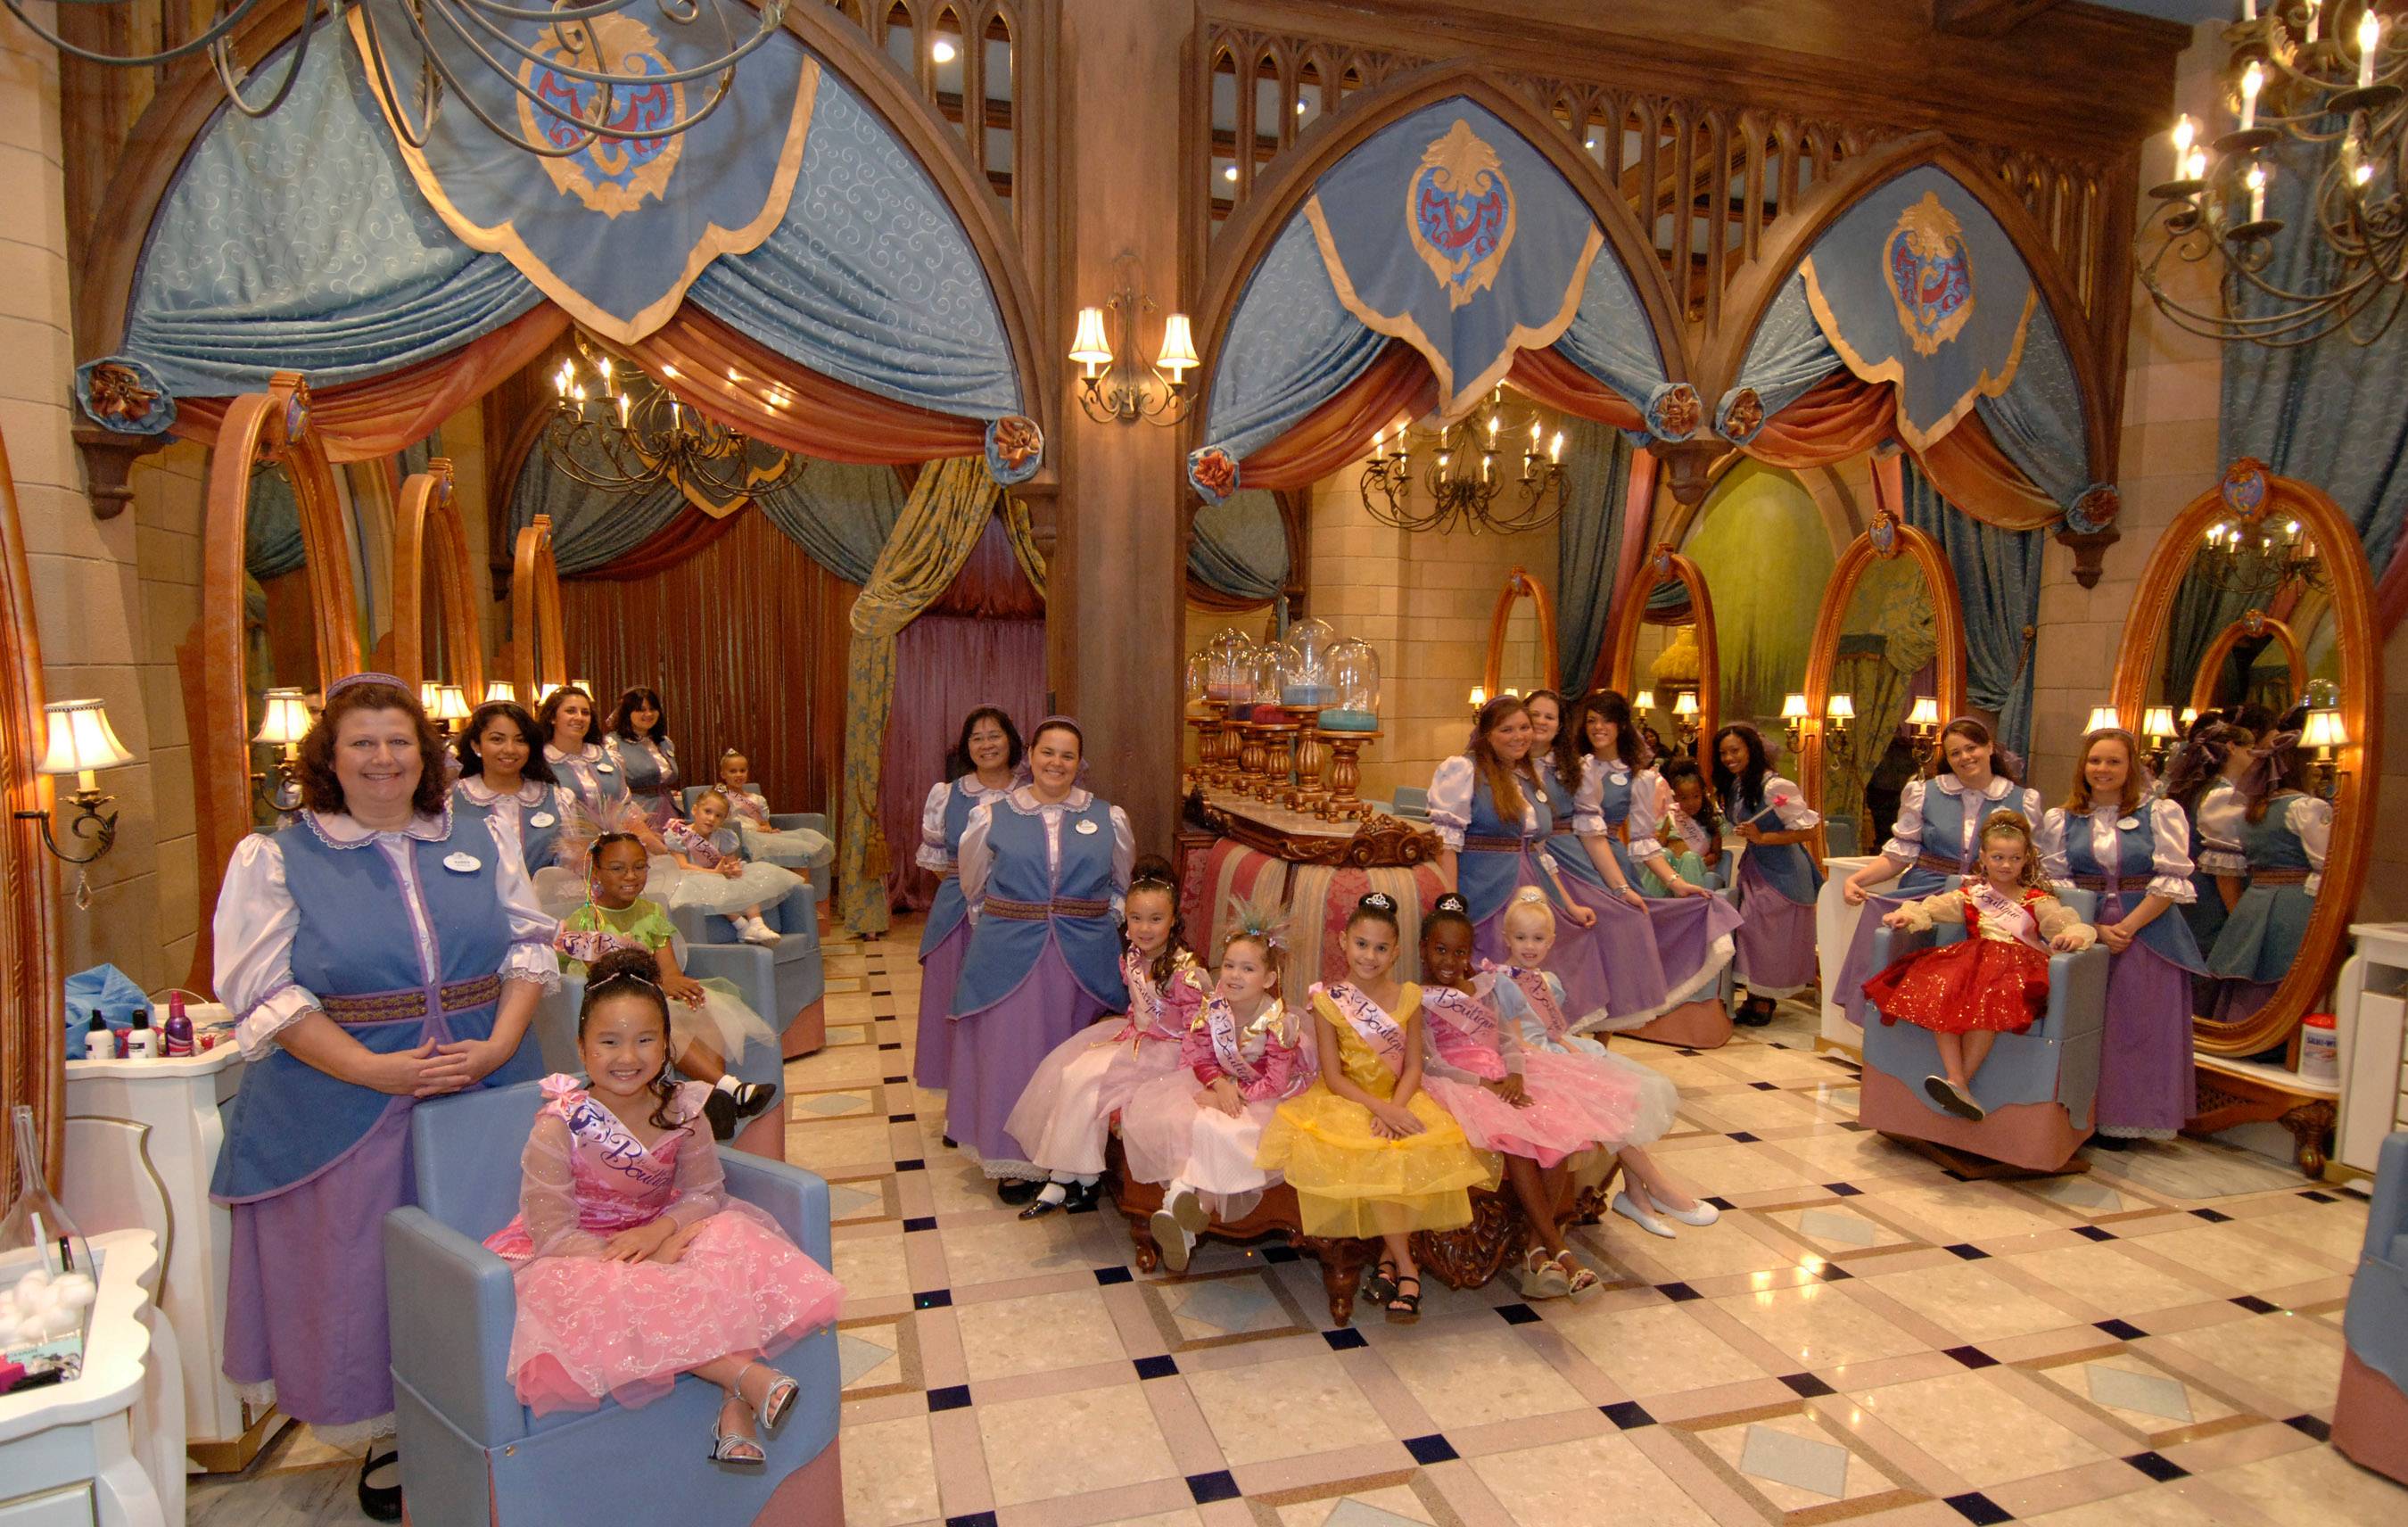 A $10 cancellation fee will be applied to credit cards for all no-shows at Bibbidi Bobbidi Boutique